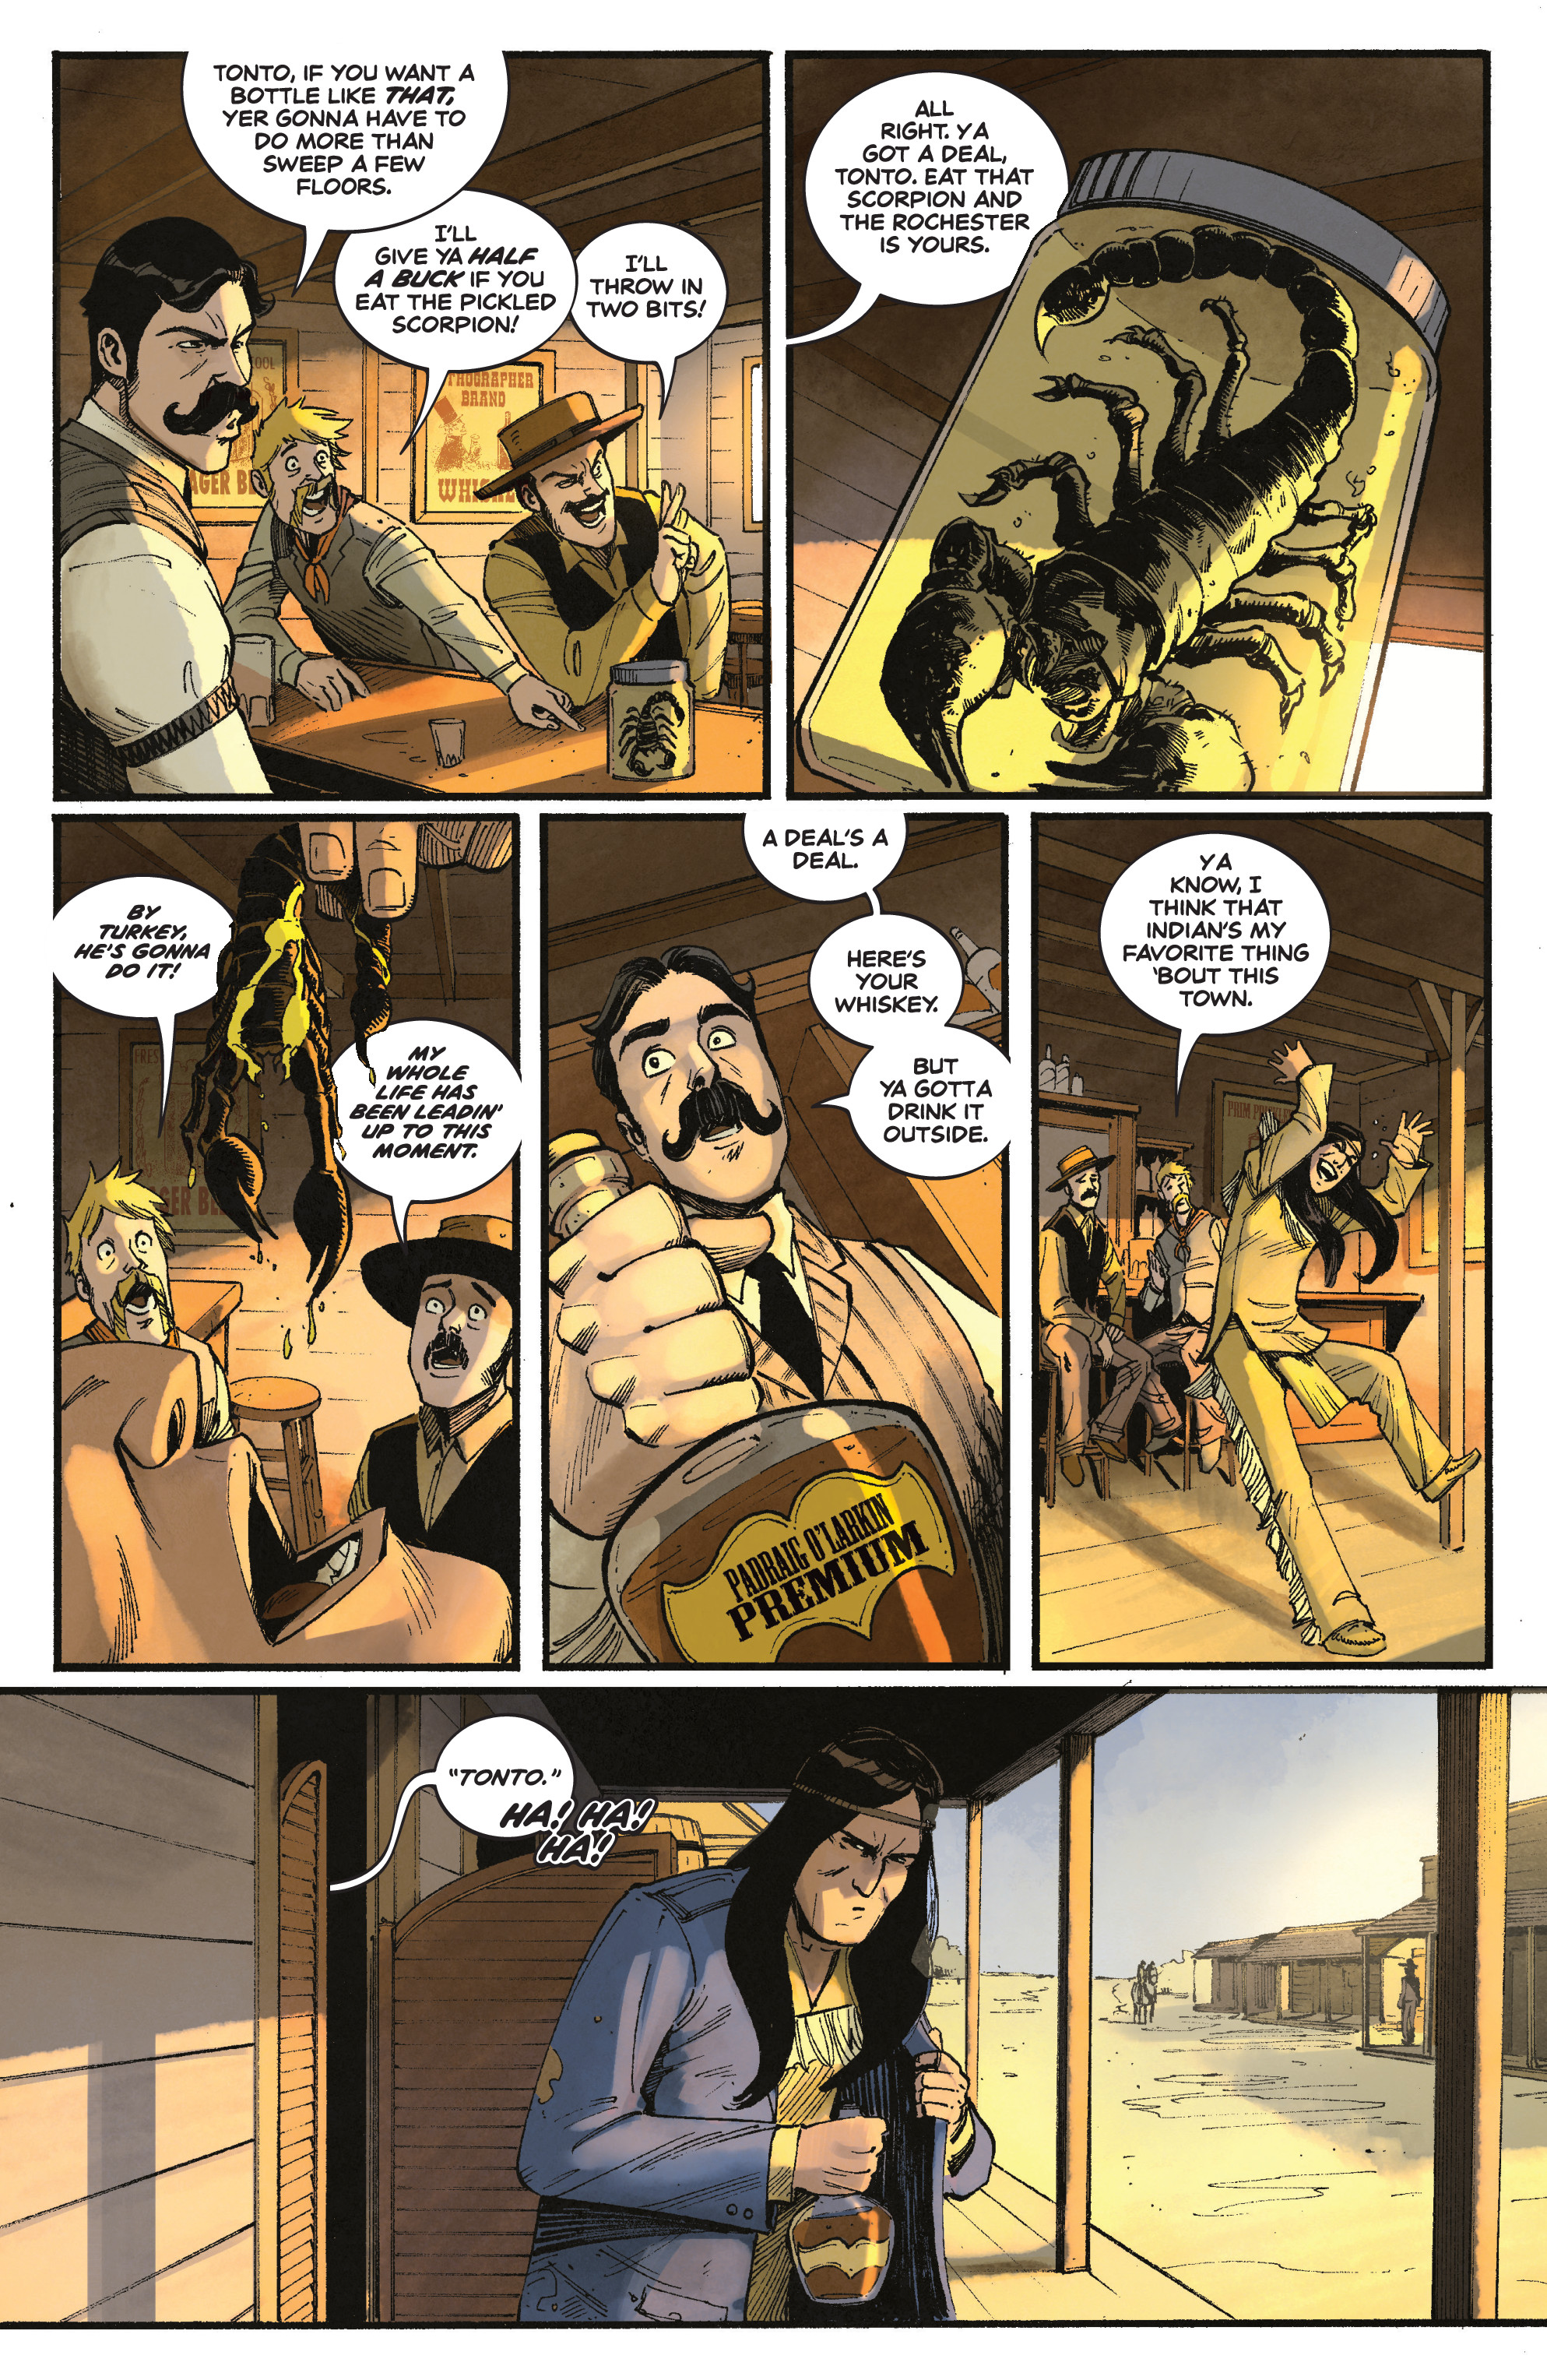 The Lone Ranger Vol. 3 (2018-): Chapter 2 - Page 4